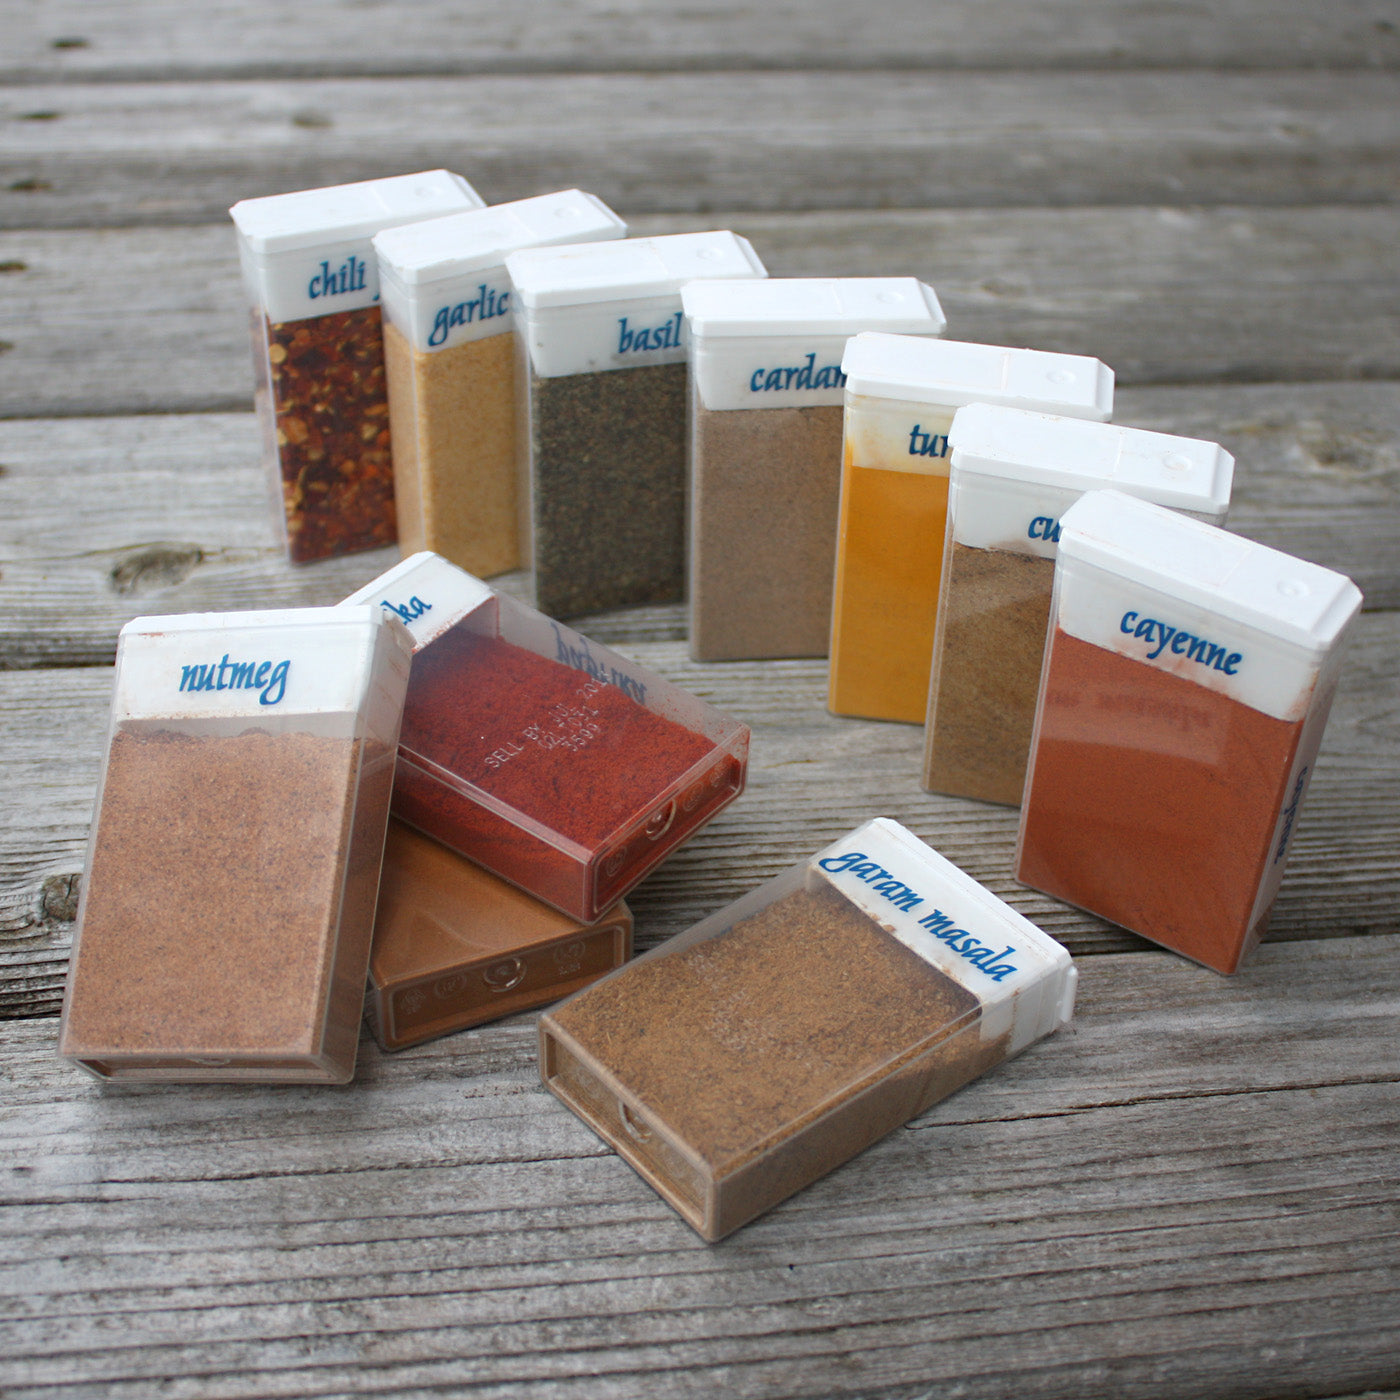 Spice Up Your Life With These Travel Spice And Condiment Containers